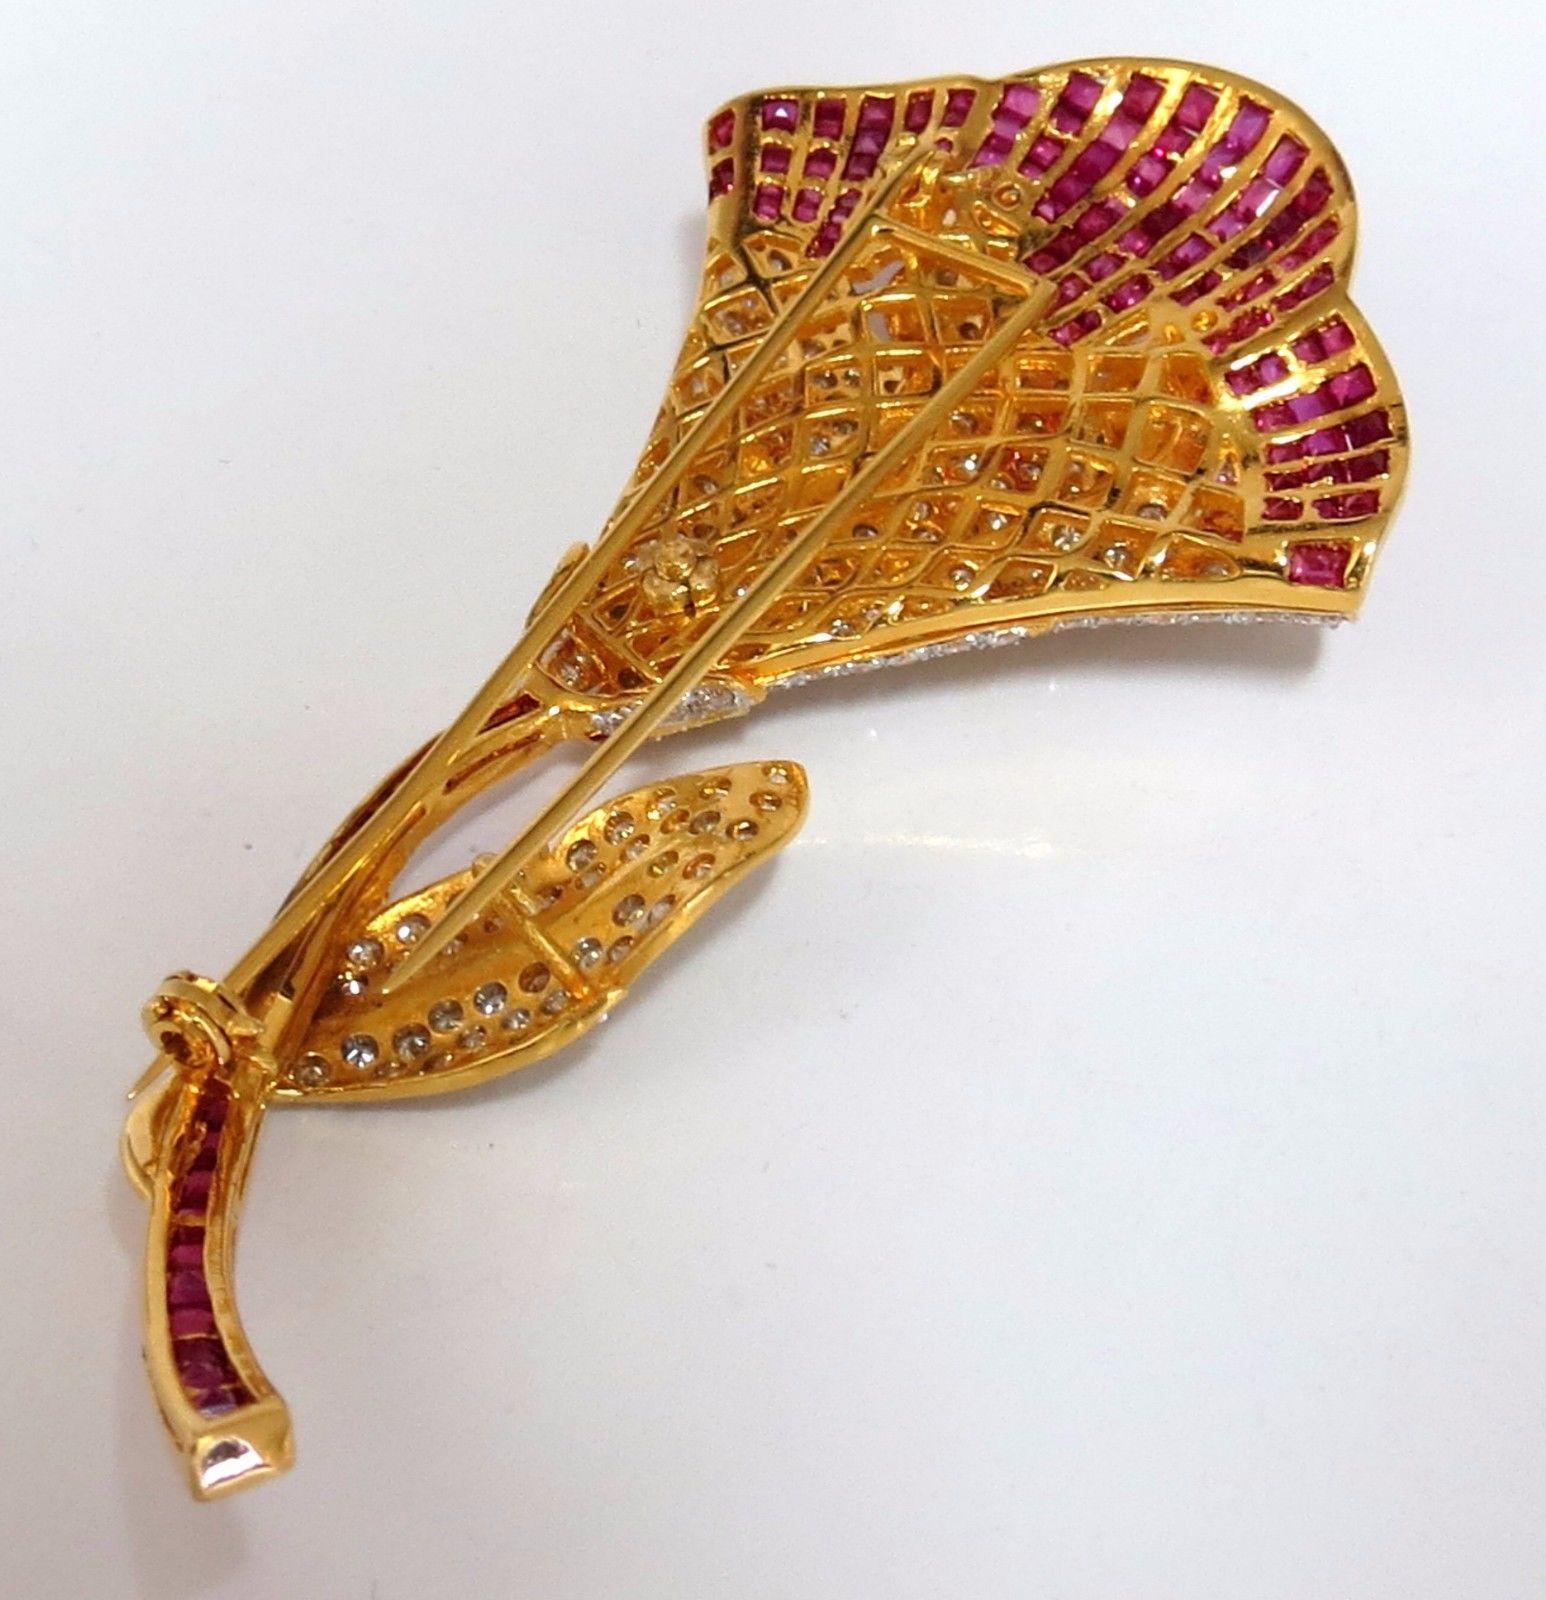 Floral Bundle Brooch Pin

 5.00ct natural diamonds

Rounds, Full cut Brilliant.

G-color VS-2 clarity.

6.50ct natural ruby. 

Baguette, square cuts.

18kt yellow gold 

3D intricate detail of flowers

24.5 grams.

Overall: 3.2 X 1.6 inch

$17000